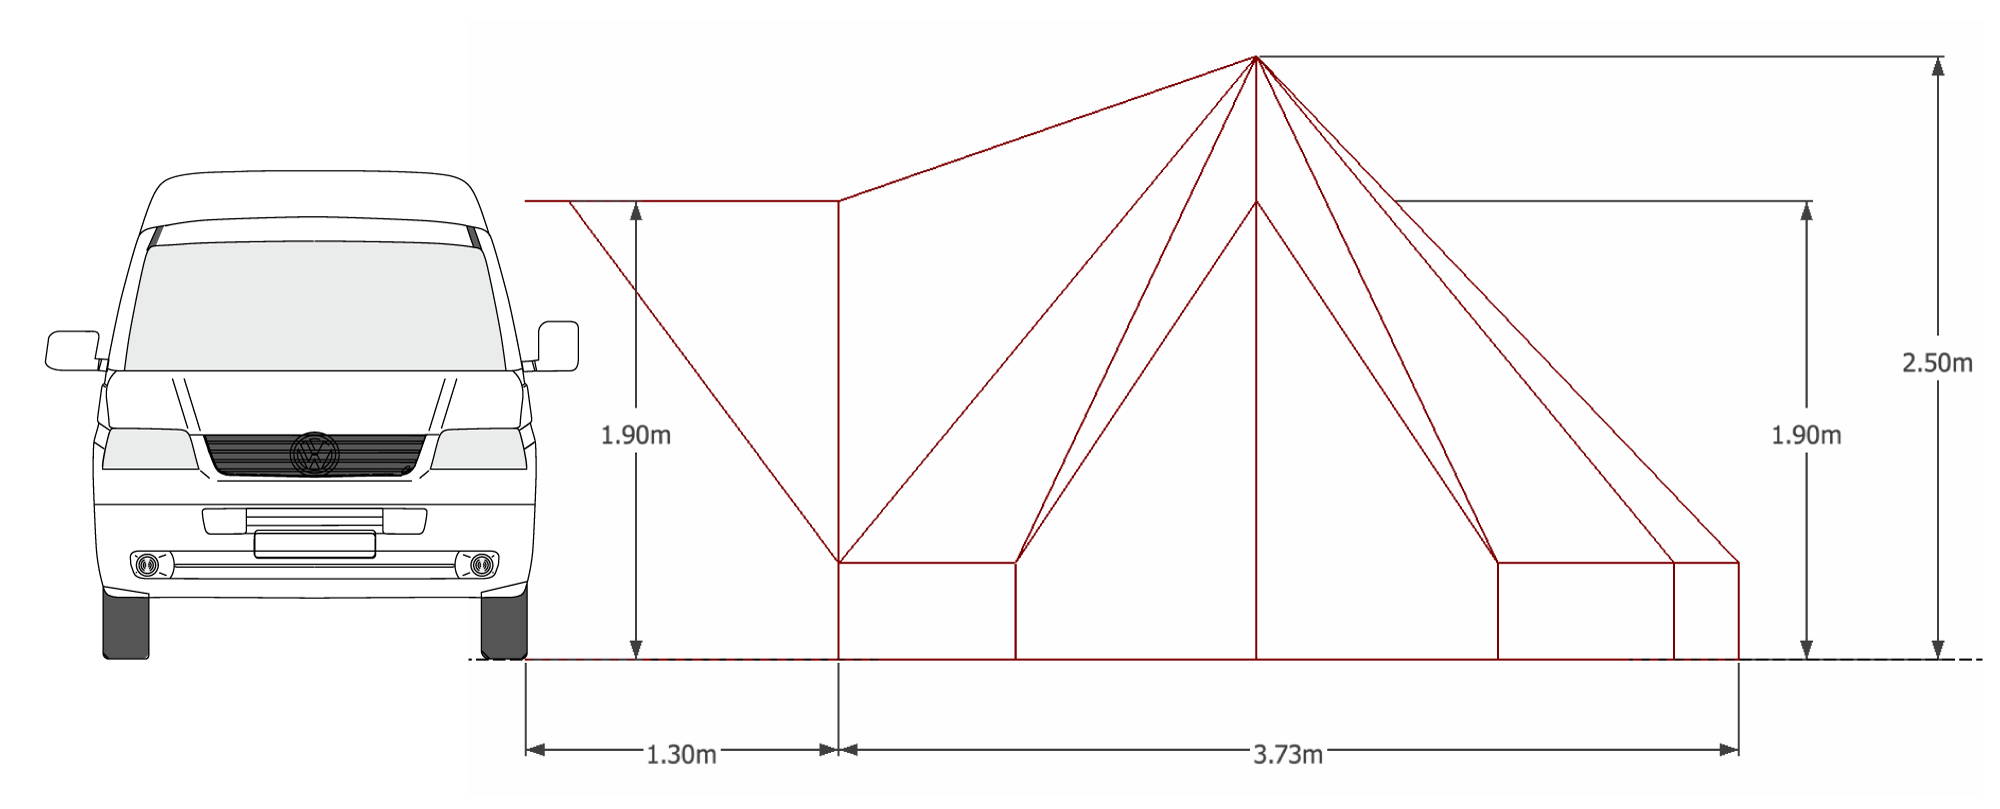 Image showing tent measurements from front view